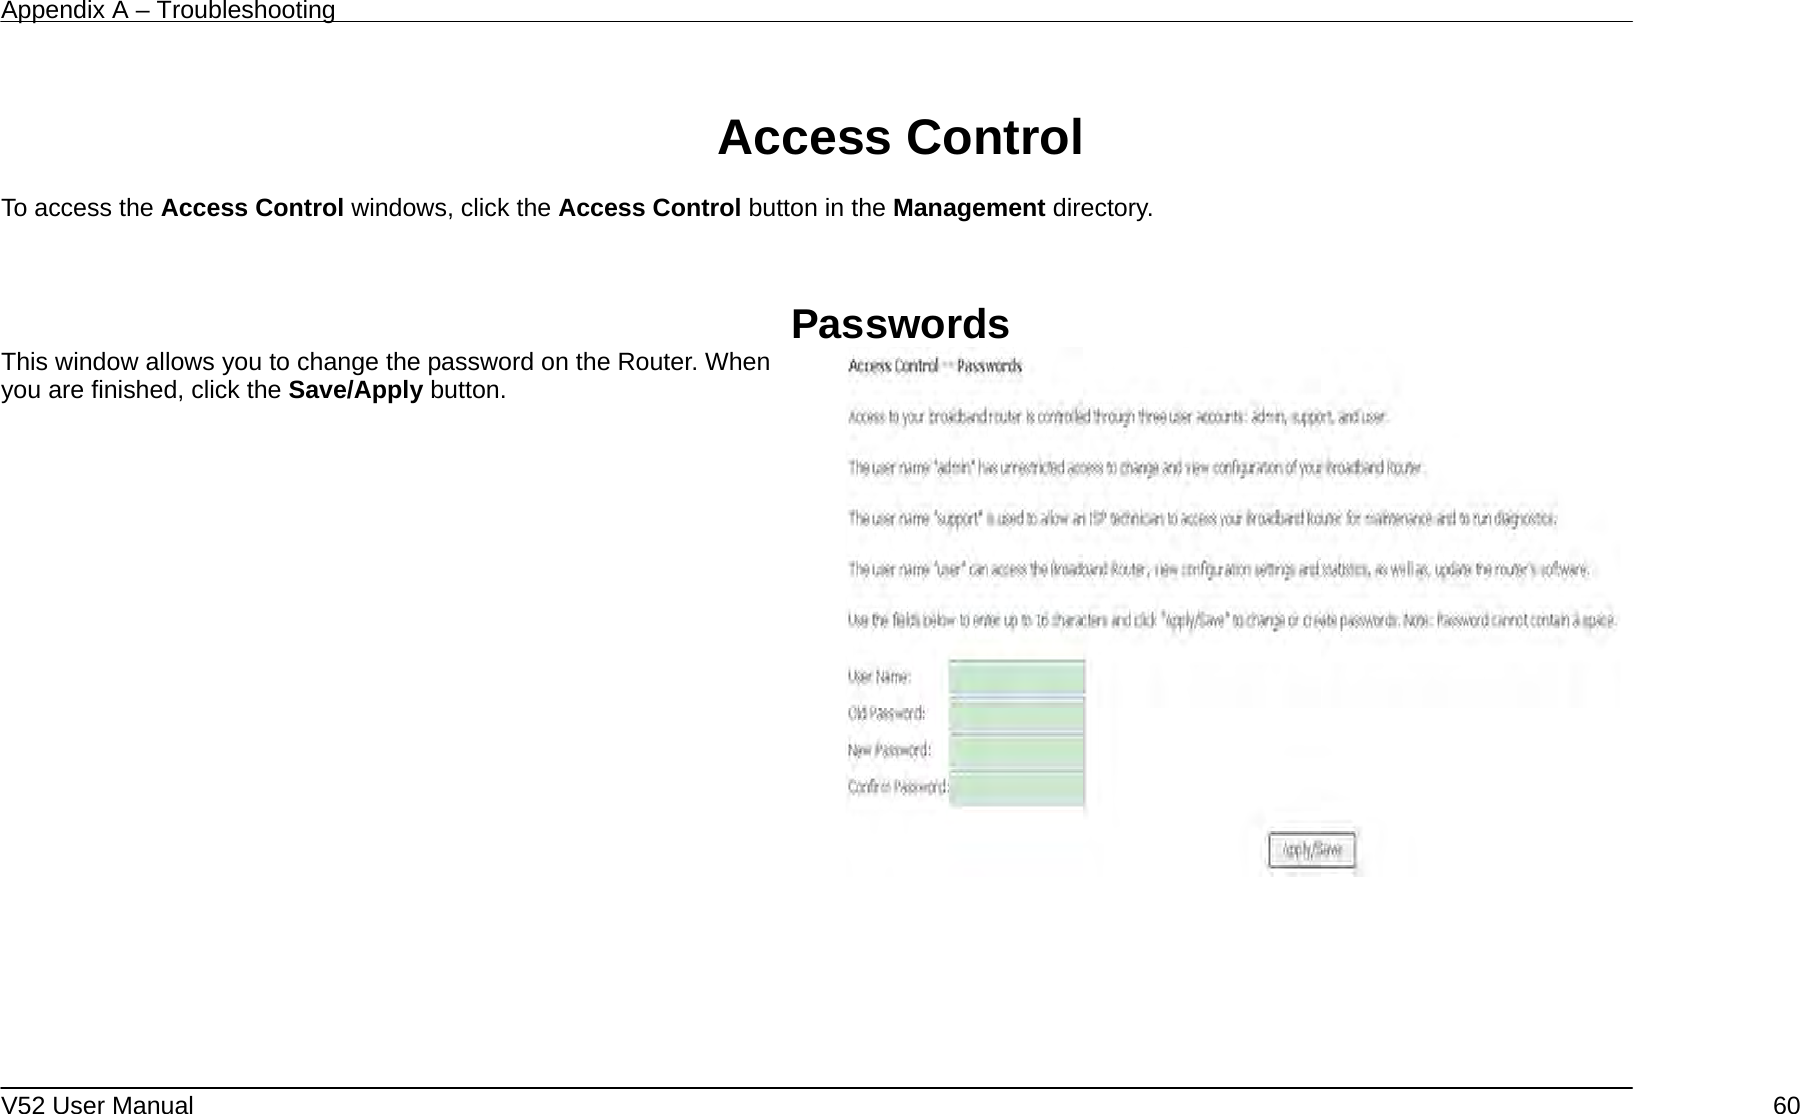 Appendix A – Troubleshooting   V52 User Manual    60 Access Control  To access the Access Control windows, click the Access Control button in the Management directory.   Passwords This window allows you to change the password on the Router. When you are finished, click the Save/Apply button.         